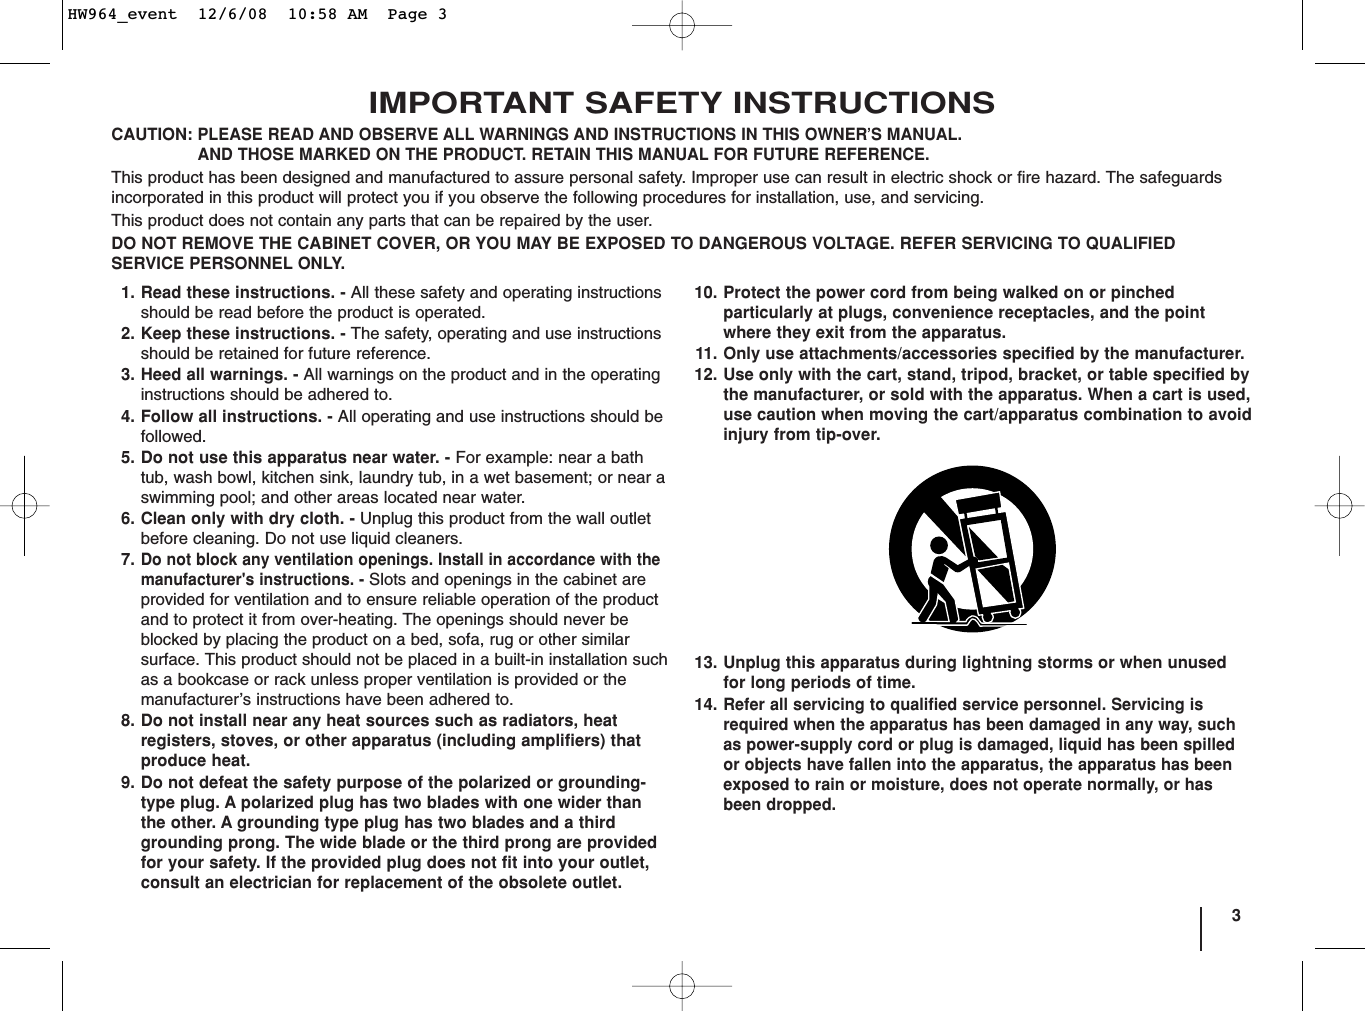 3IMPORTANT SAFETY INSTRUCTIONSCAUTION:PLEASE READ AND OBSERVE ALL WARNINGS AND INSTRUCTIONS IN THIS OWNER’S MANUAL. AND THOSE MARKED ON THE PRODUCT. RETAIN THIS MANUAL FOR FUTURE REFERENCE.This product has been designed and manufactured to assure personal safety. Improper use can result in electric shock or fire hazard. The safeguardsincorporated in this product will protect you if you observe the following procedures for installation, use, and servicing.This product does not contain any parts that can be repaired by the user.DO NOT REMOVE THE CABINET COVER, OR YOU MAY BE EXPOSED TO DANGEROUS VOLTAGE. REFER SERVICING TO QUALIFIEDSERVICE PERSONNEL ONLY.1. Read these instructions. - All these safety and operating instructionsshould be read before the product is operated.2. Keep these instructions. - The safety, operating and use instructionsshould be retained for future reference.3. Heed all warnings. - All warnings on the product and in the operatinginstructions should be adhered to.4. Follow all instructions. - All operating and use instructions should befollowed.5. Do not use this apparatus near water. - For example: near a bathtub, wash bowl, kitchen sink, laundry tub, in a wet basement; or near aswimming pool; and other areas located near water.6. Clean only with dry cloth. - Unplug this product from the wall outletbefore cleaning. Do not use liquid cleaners.7.Do not block any ventilation openings. Install in accordance with themanufacturer&apos;s instructions. - Slots and openings in the cabinet areprovided for ventilation and to ensure reliable operation of the productand to protect it from over-heating. The openings should never beblocked by placing the product on a bed, sofa, rug or other similarsurface. This product should not be placed in a built-in installation suchas a bookcase or rack unless proper ventilation is provided or themanufacturer’s instructions have been adhered to.8. Do not install near any heat sources such as radiators, heat registers, stoves, or other apparatus (including amplifiers) thatproduce heat. 9. Do not defeat the safety purpose of the polarized or grounding-type plug. A polarized plug has two blades with one wider thanthe other. A grounding type plug has two blades and a thirdgrounding prong. The wide blade or the third prong are providedfor your safety. If the provided plug does not fit into your outlet,consult an electrician for replacement of the obsolete outlet.10. Protect the power cord from being walked on or pinchedparticularly at plugs, convenience receptacles, and the pointwhere they exit from the apparatus.11. Only use attachments/accessories specified by the manufacturer.12. Use only with the cart, stand, tripod, bracket, or table specified bythe manufacturer, or sold with the apparatus. When a cart is used,use caution when moving the cart/apparatus combination to avoidinjury from tip-over.13. Unplug this apparatus during lightning storms or when unusedfor long periods of time.14.Refer all servicing to qualified service personnel. Servicing isrequired when the apparatus has been damaged in any way, suchas power-supply cord or plug is damaged, liquid has been spilledor objects have fallen into the apparatus, the apparatus has beenexposed to rain or moisture, does not operate normally, or hasbeen dropped.HW964_event  12/6/08  10:58 AM  Page 3